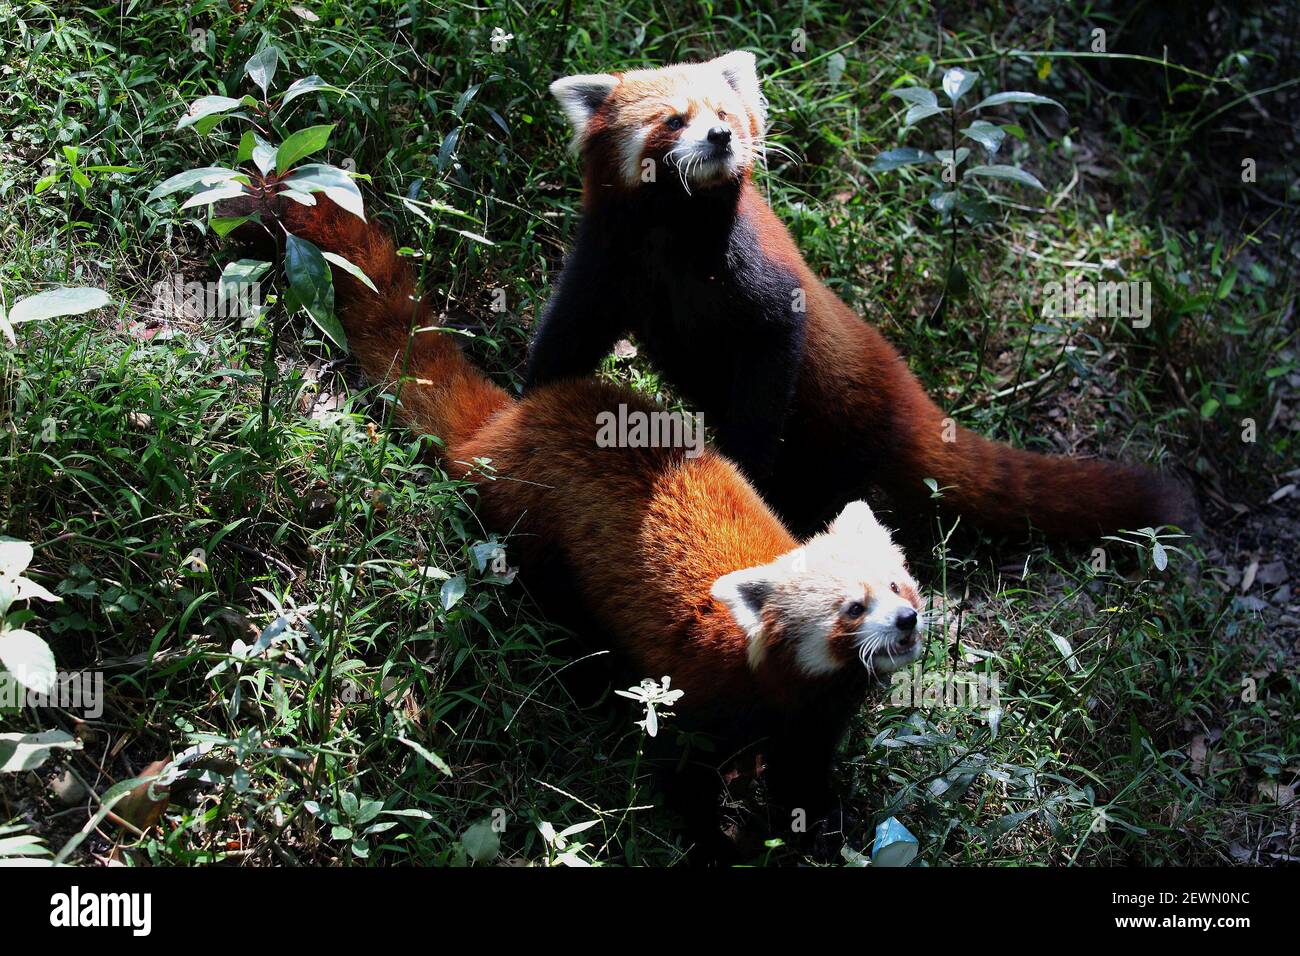 Red pandas wait for the given food at Central Zoo in Lalitpur, Nepal, Nov.  8, 2016. Three red pandas are preserved and maintained at Central Zoo of  Nepal, equipped with air conditioned